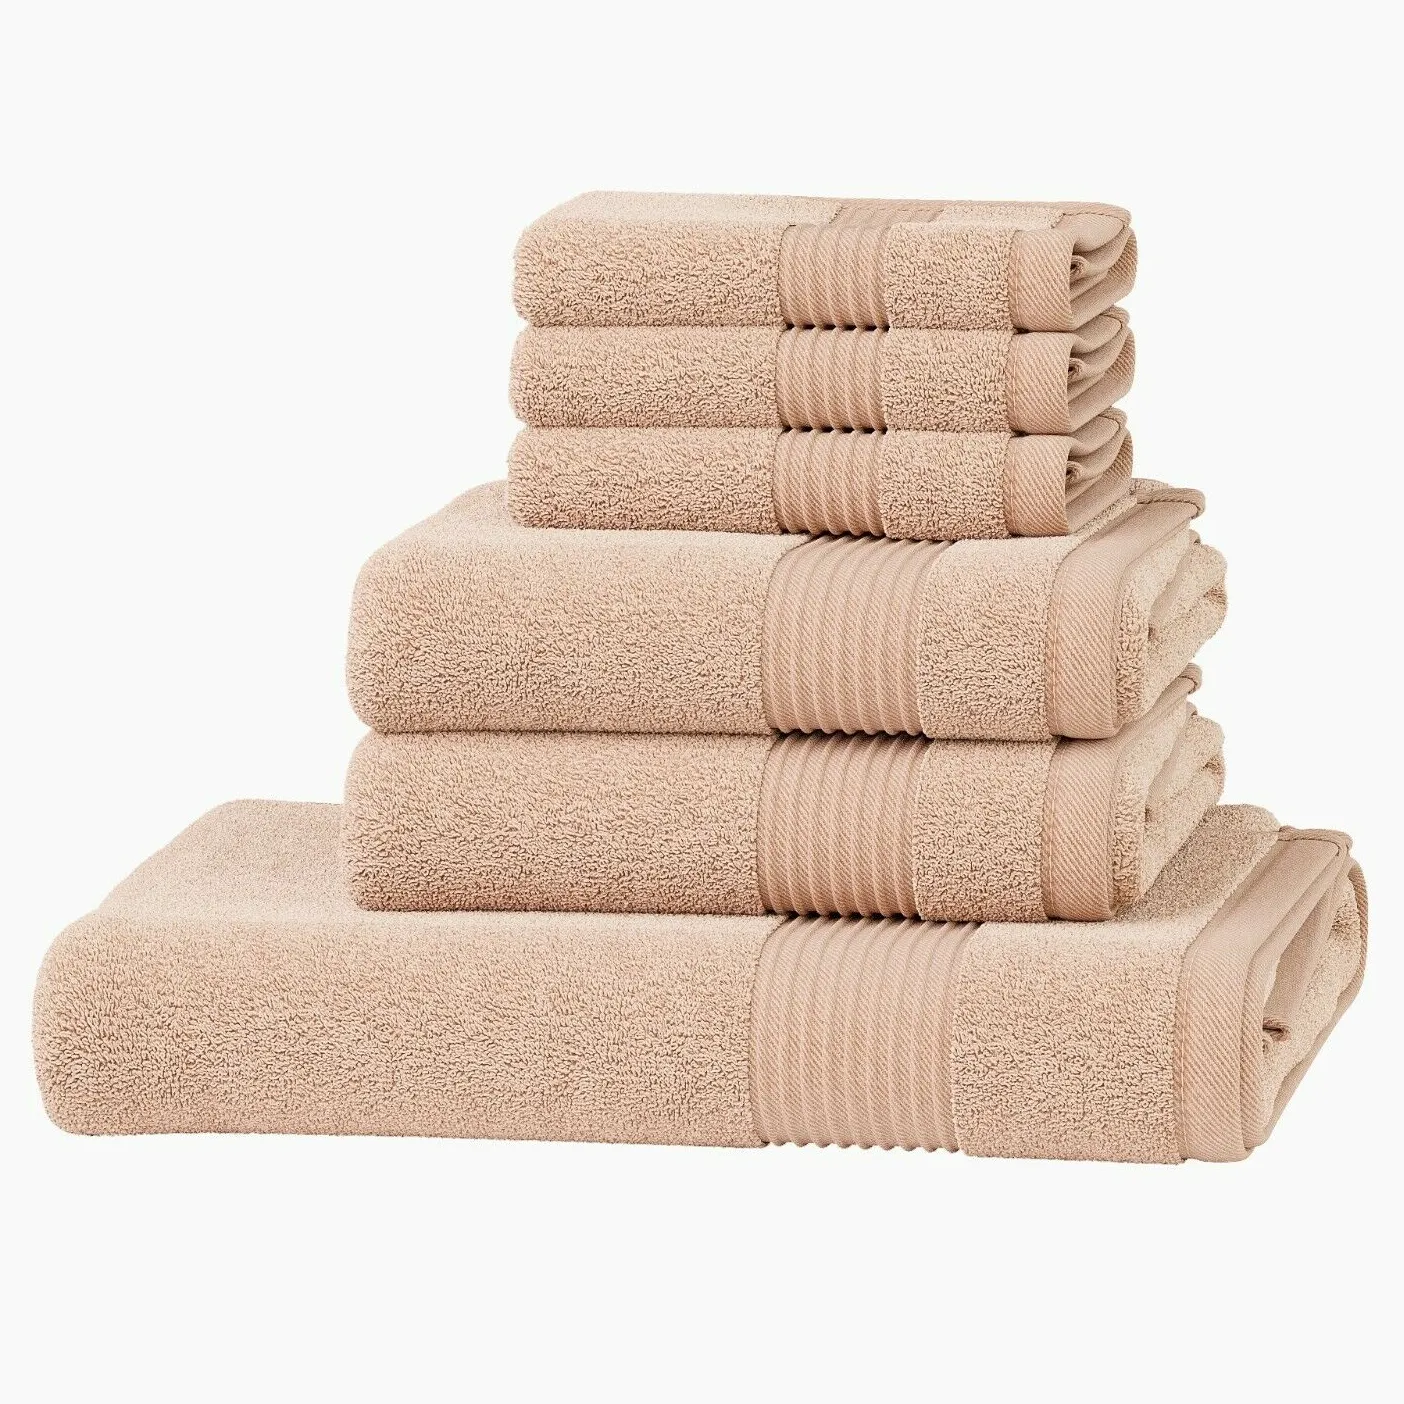 Luxury 100% cotton terry bath hand face towel set with good quality